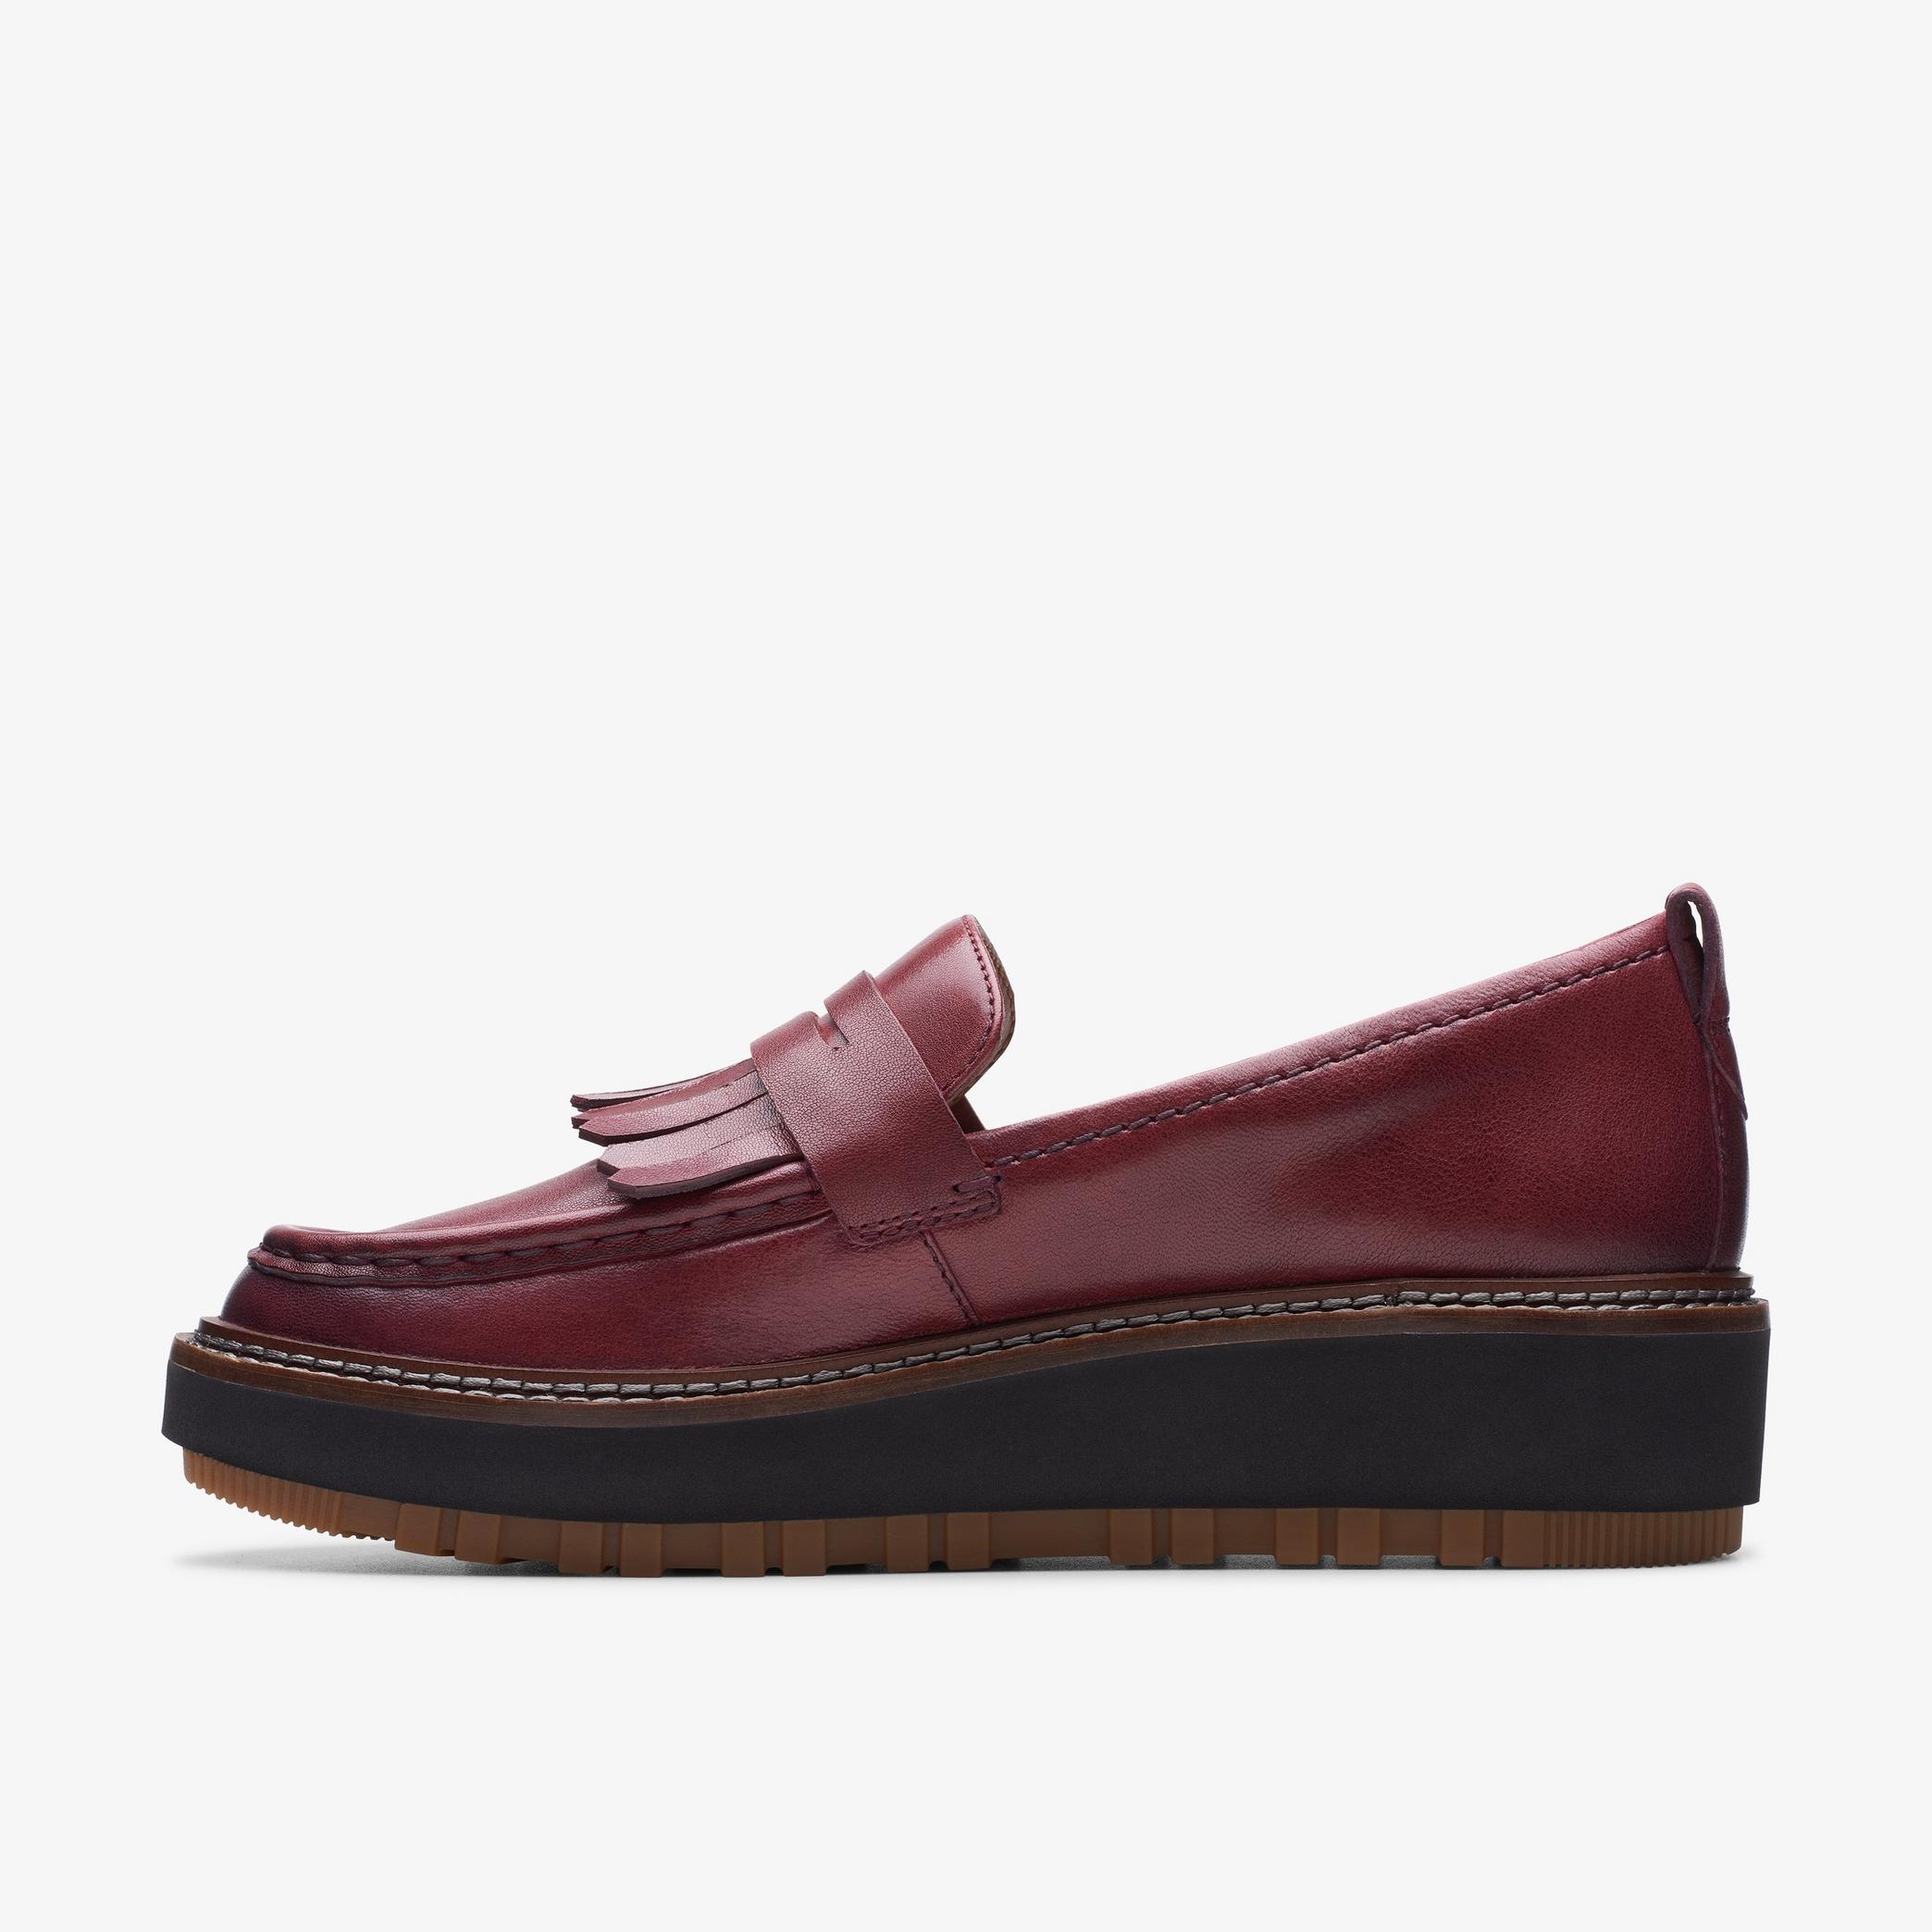 Orianna Loafer Burgundy Leather Loafers, view 3 of 7